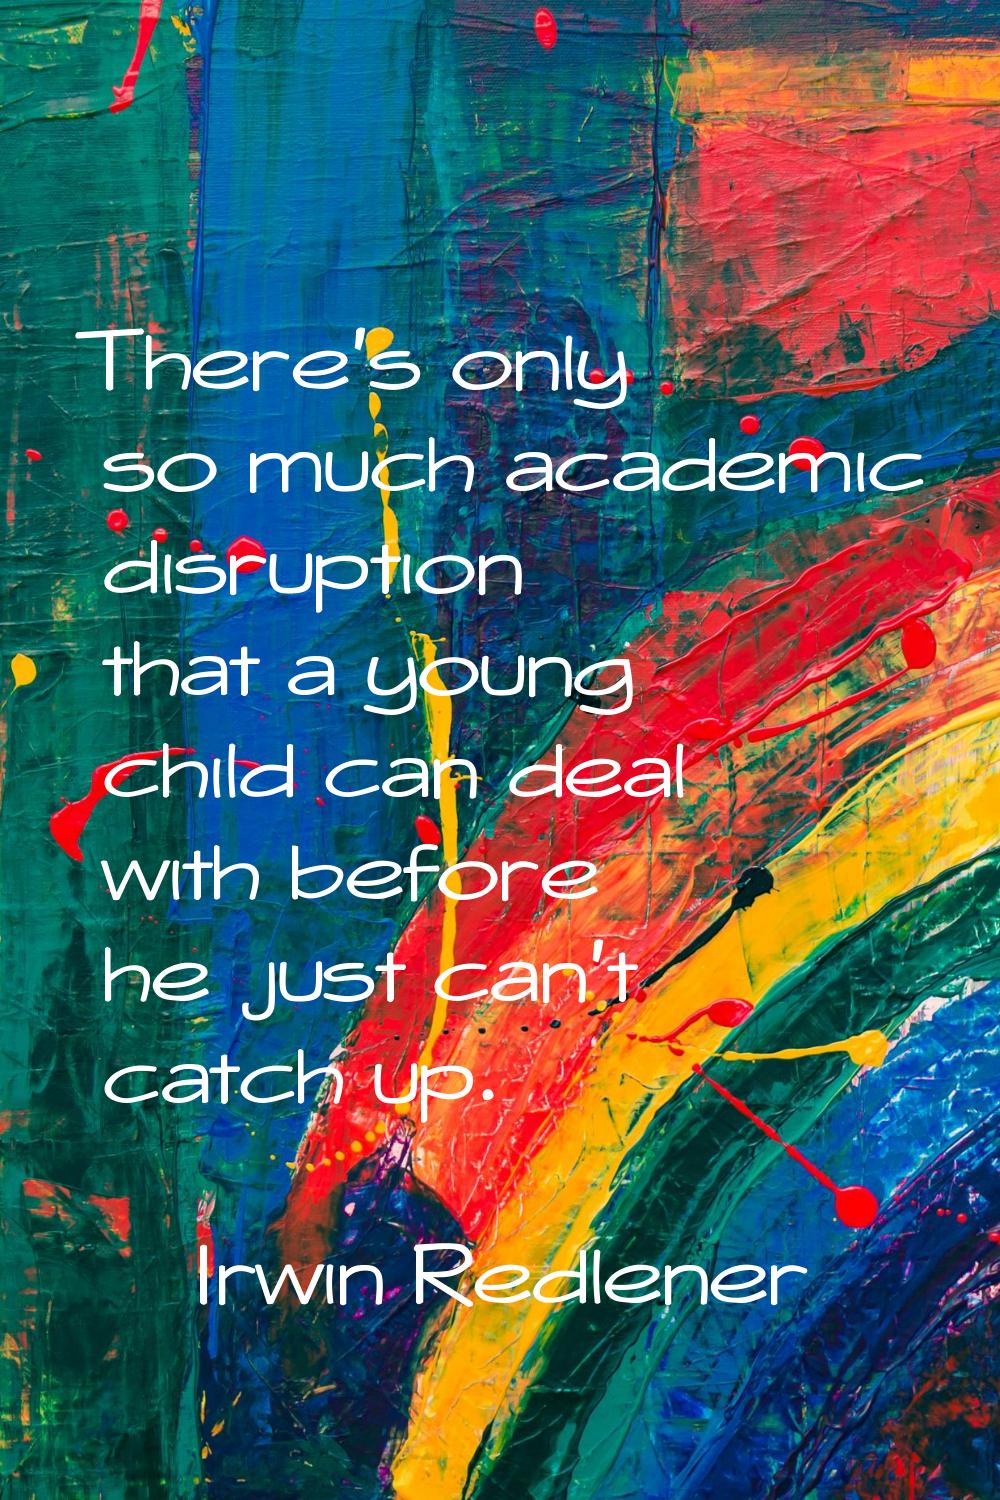 There's only so much academic disruption that a young child can deal with before he just can't catc